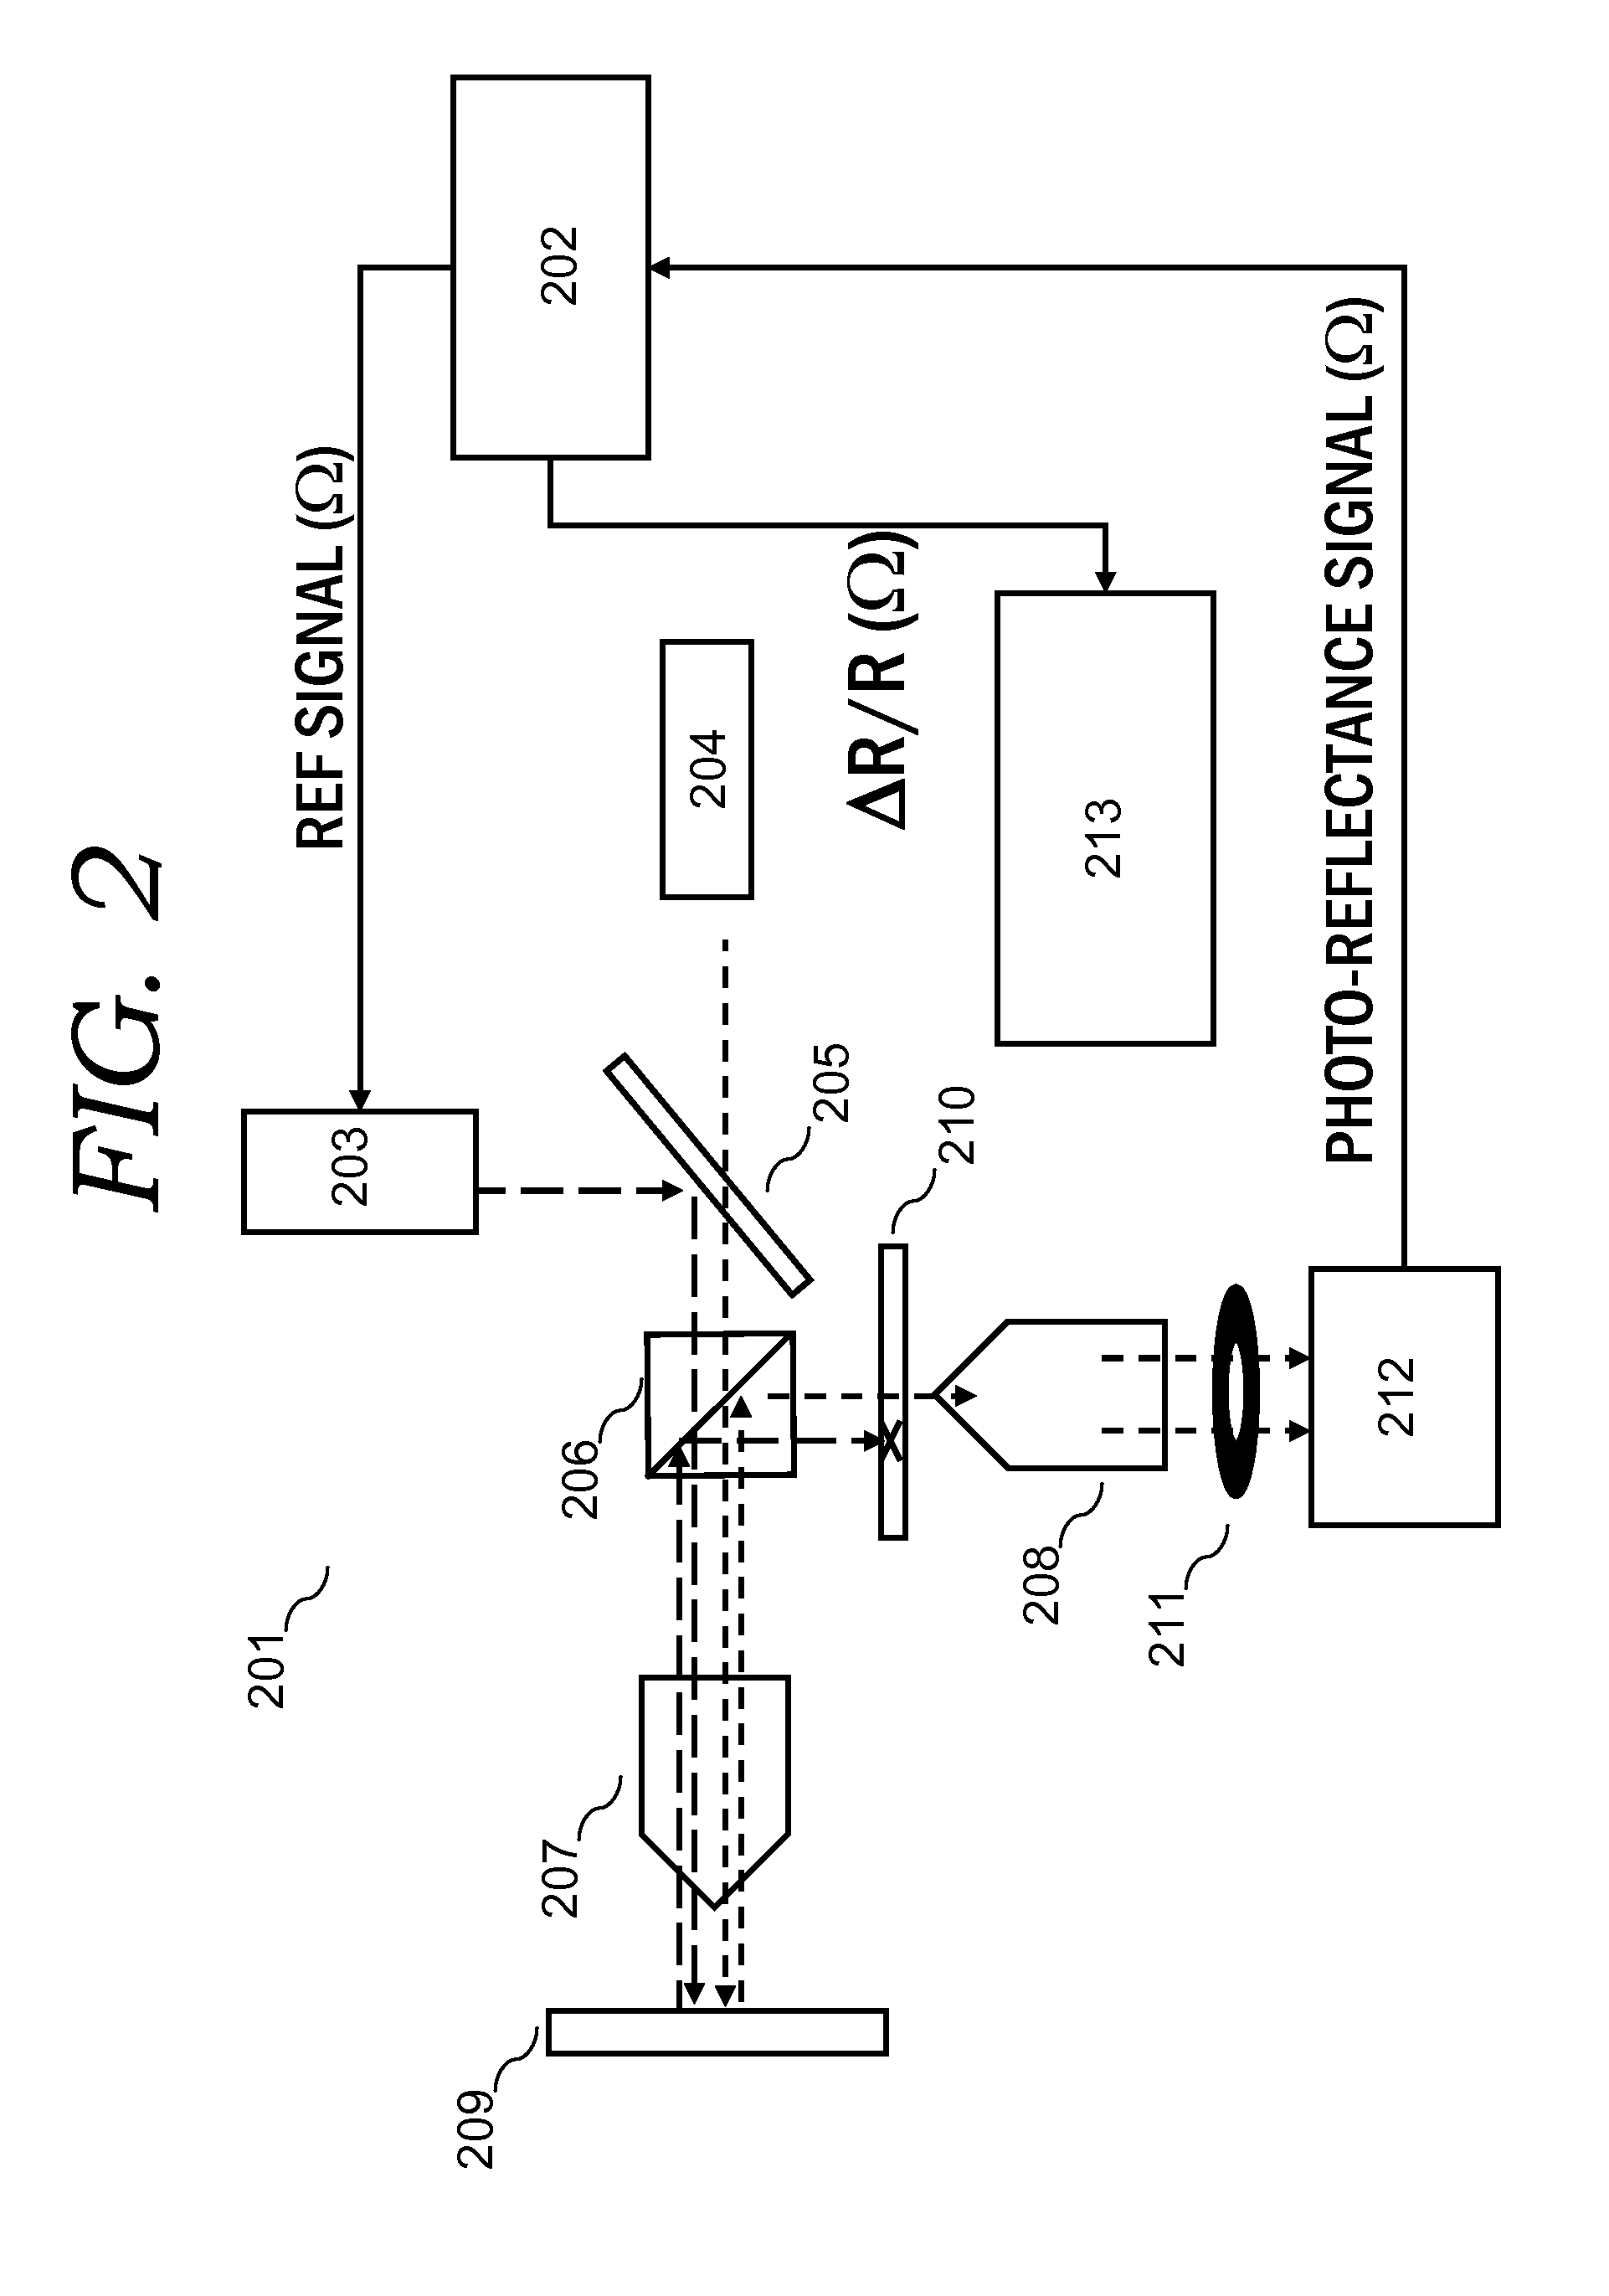 Method and Apparatus of Z-Scan Photoreflectance Characterization